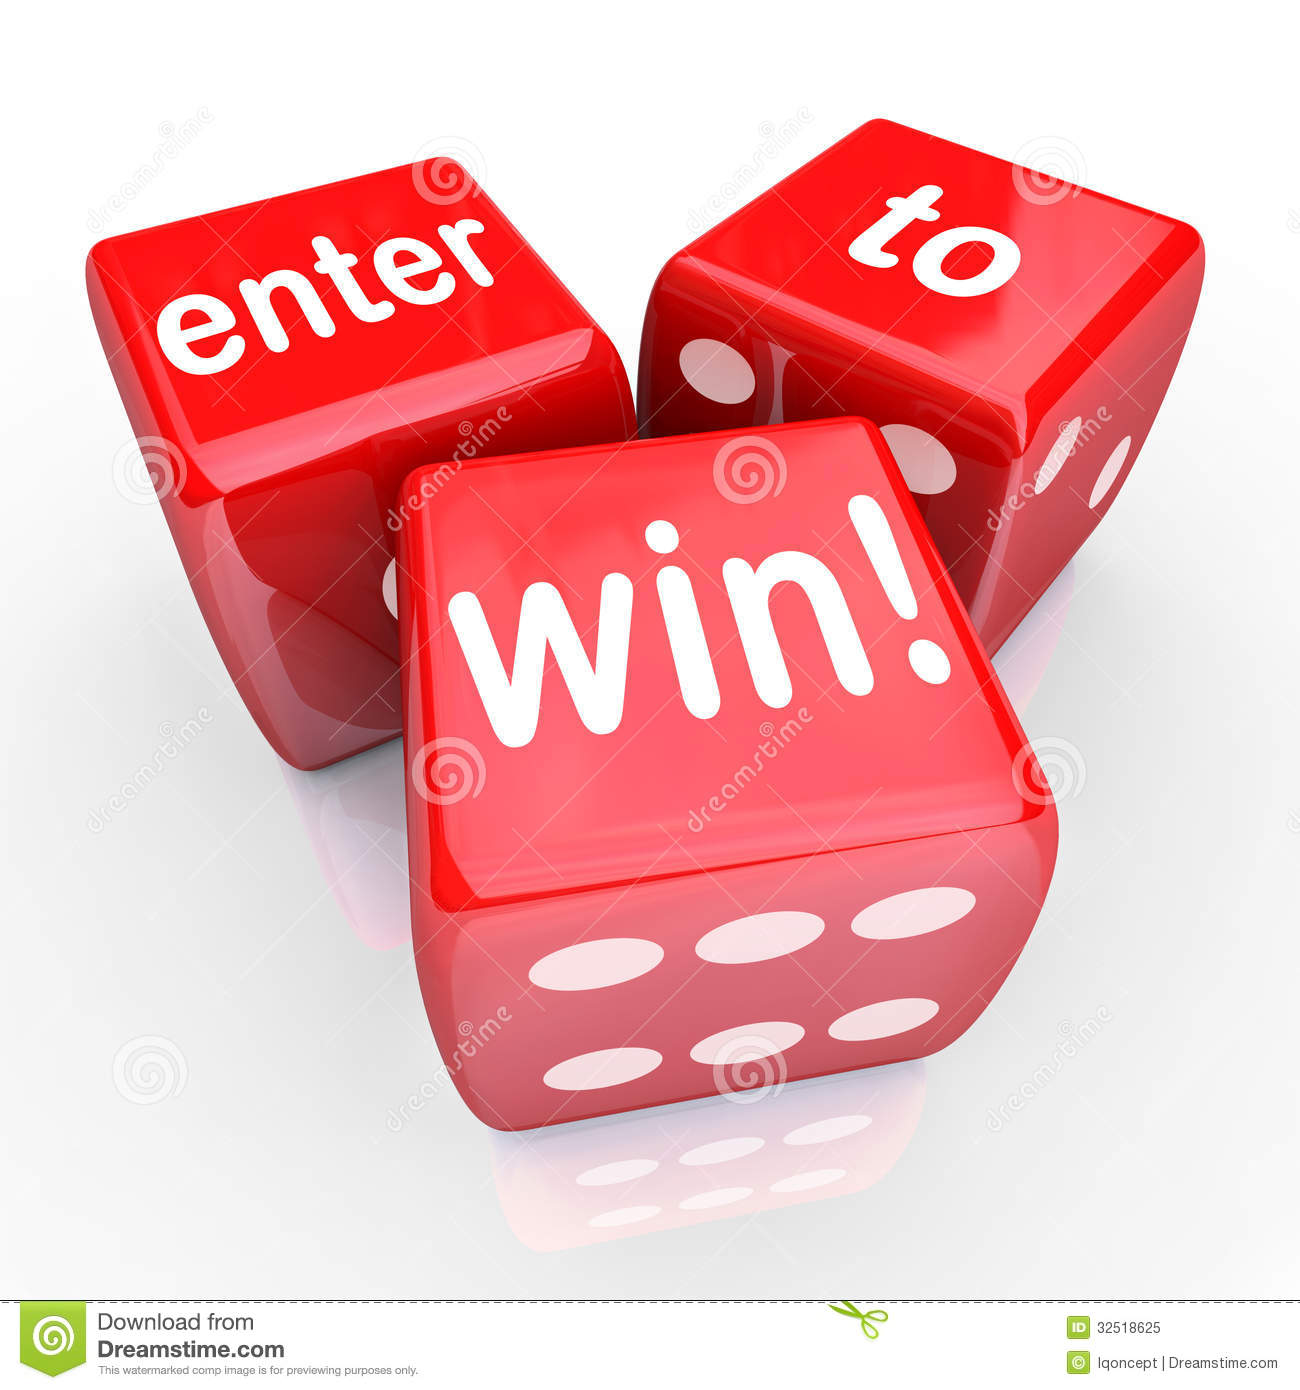 Enter To Win 3 Red Dice Contest Winning Entry Royalty Free Stock Photo